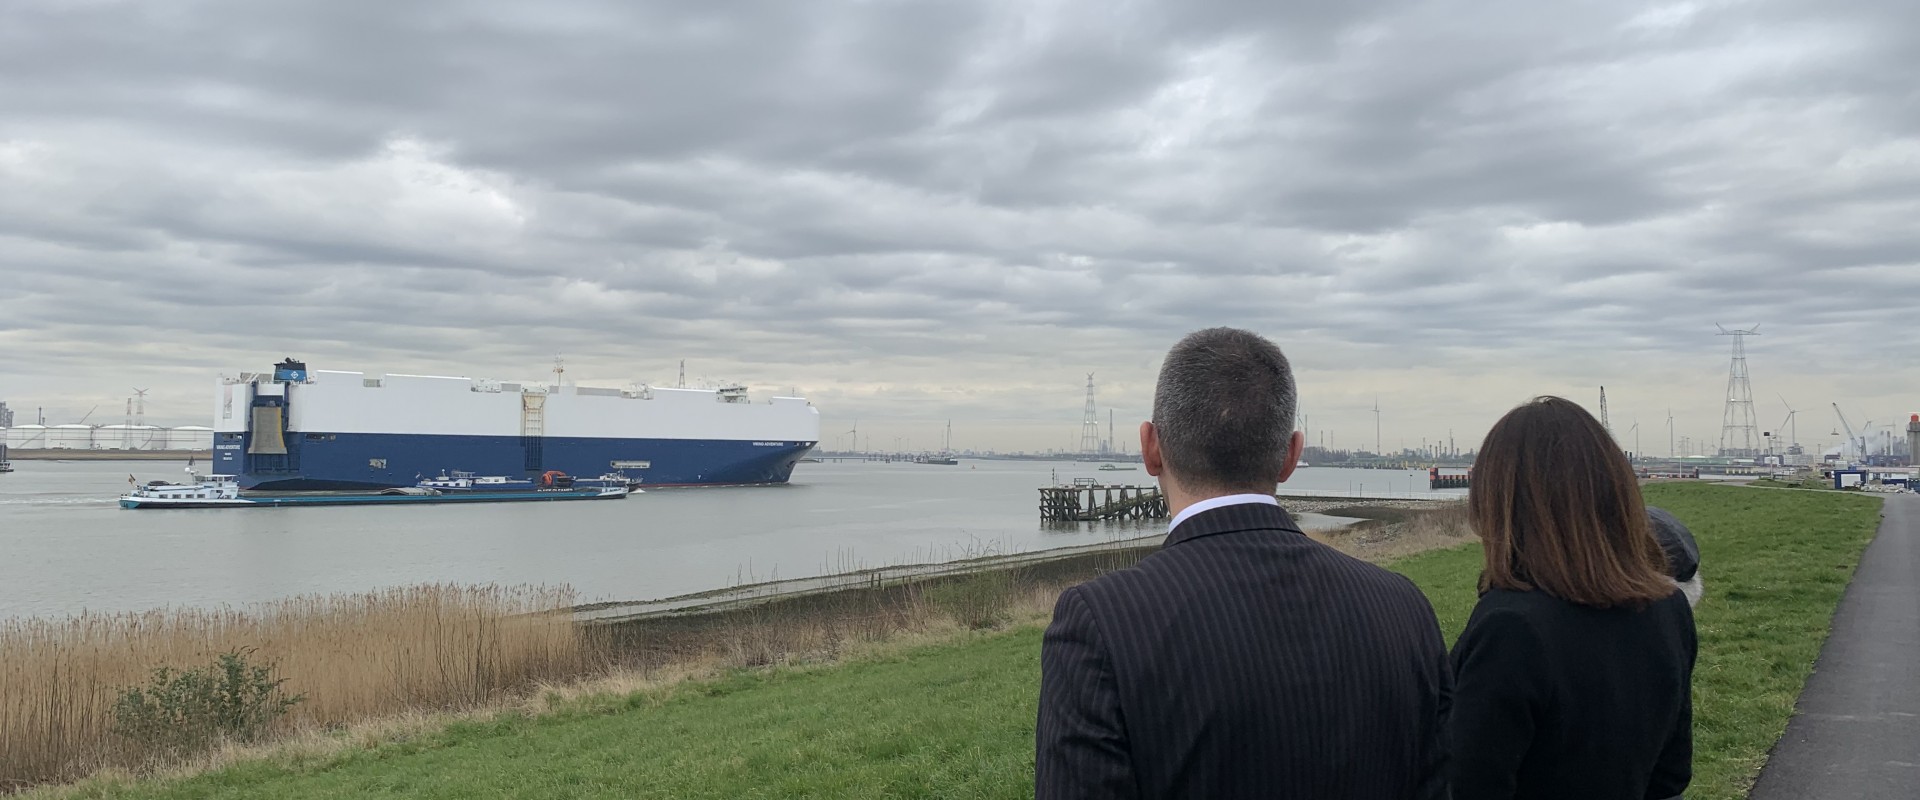 A Port Authority Delegation Visits Antwerp